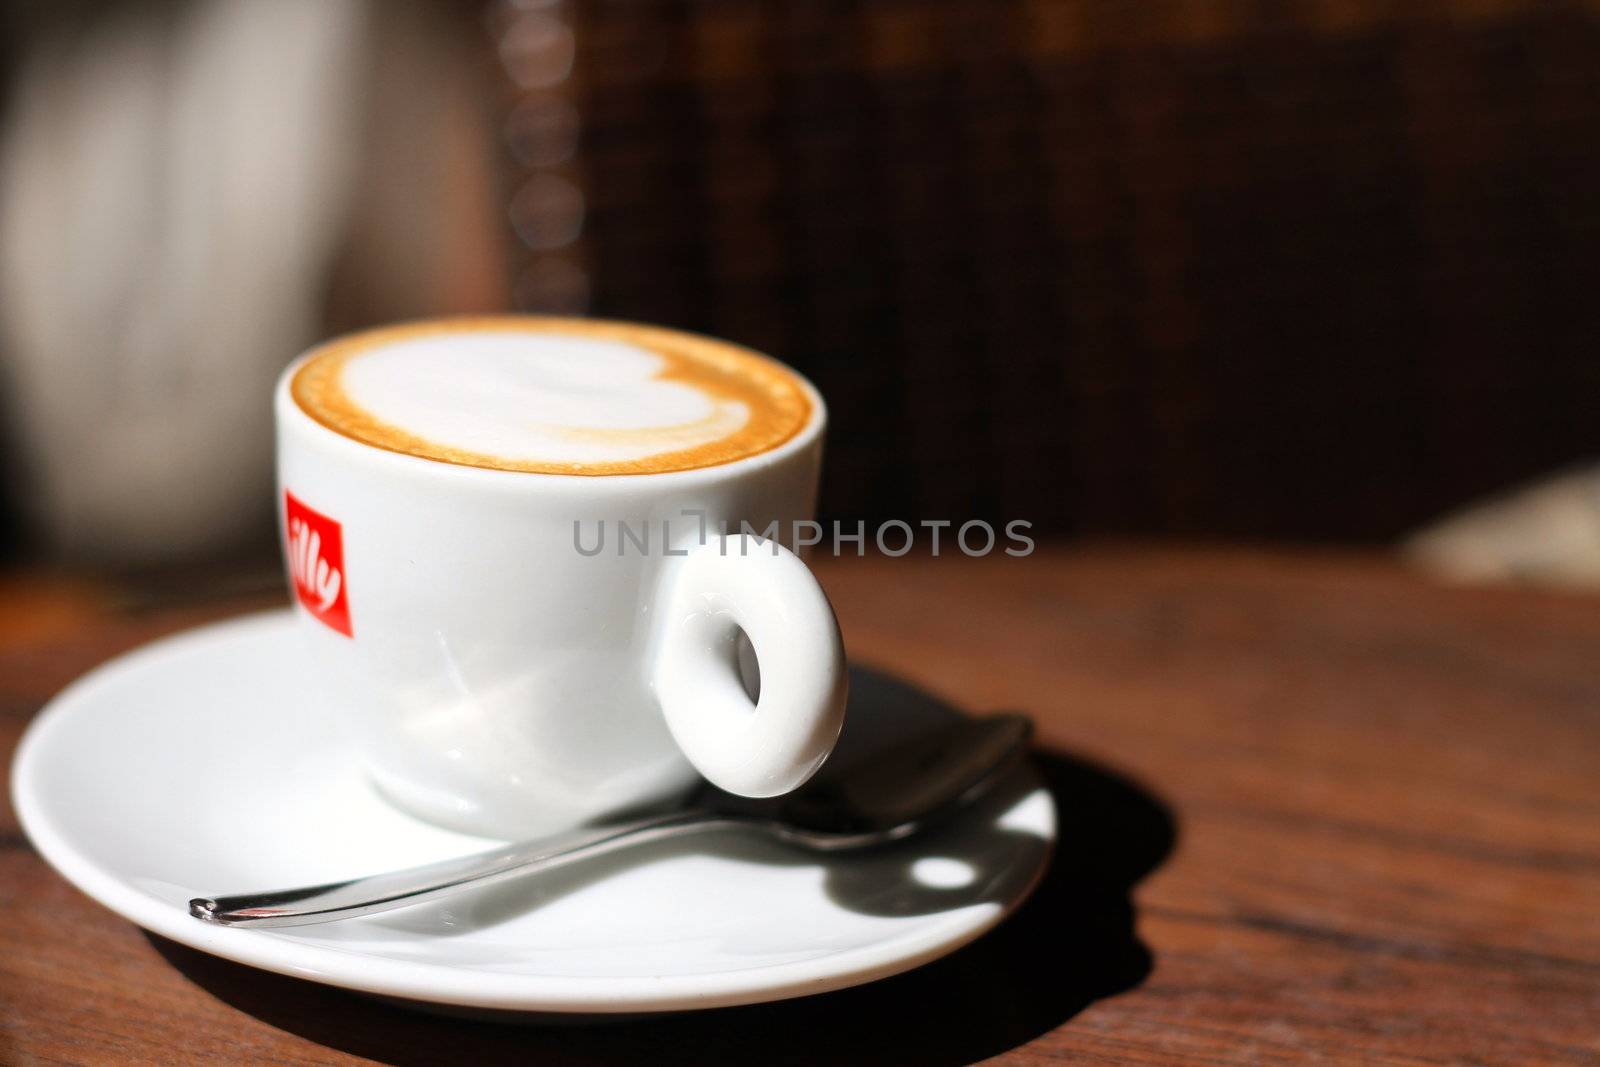 Illy coffee cup on the table of an italian bar. Hungarian born Francesco Illy first came to Trieste, Italy after World War I. There he studied economics, and he returned and found a business in cocoa and coffee wich would become its sole focus.